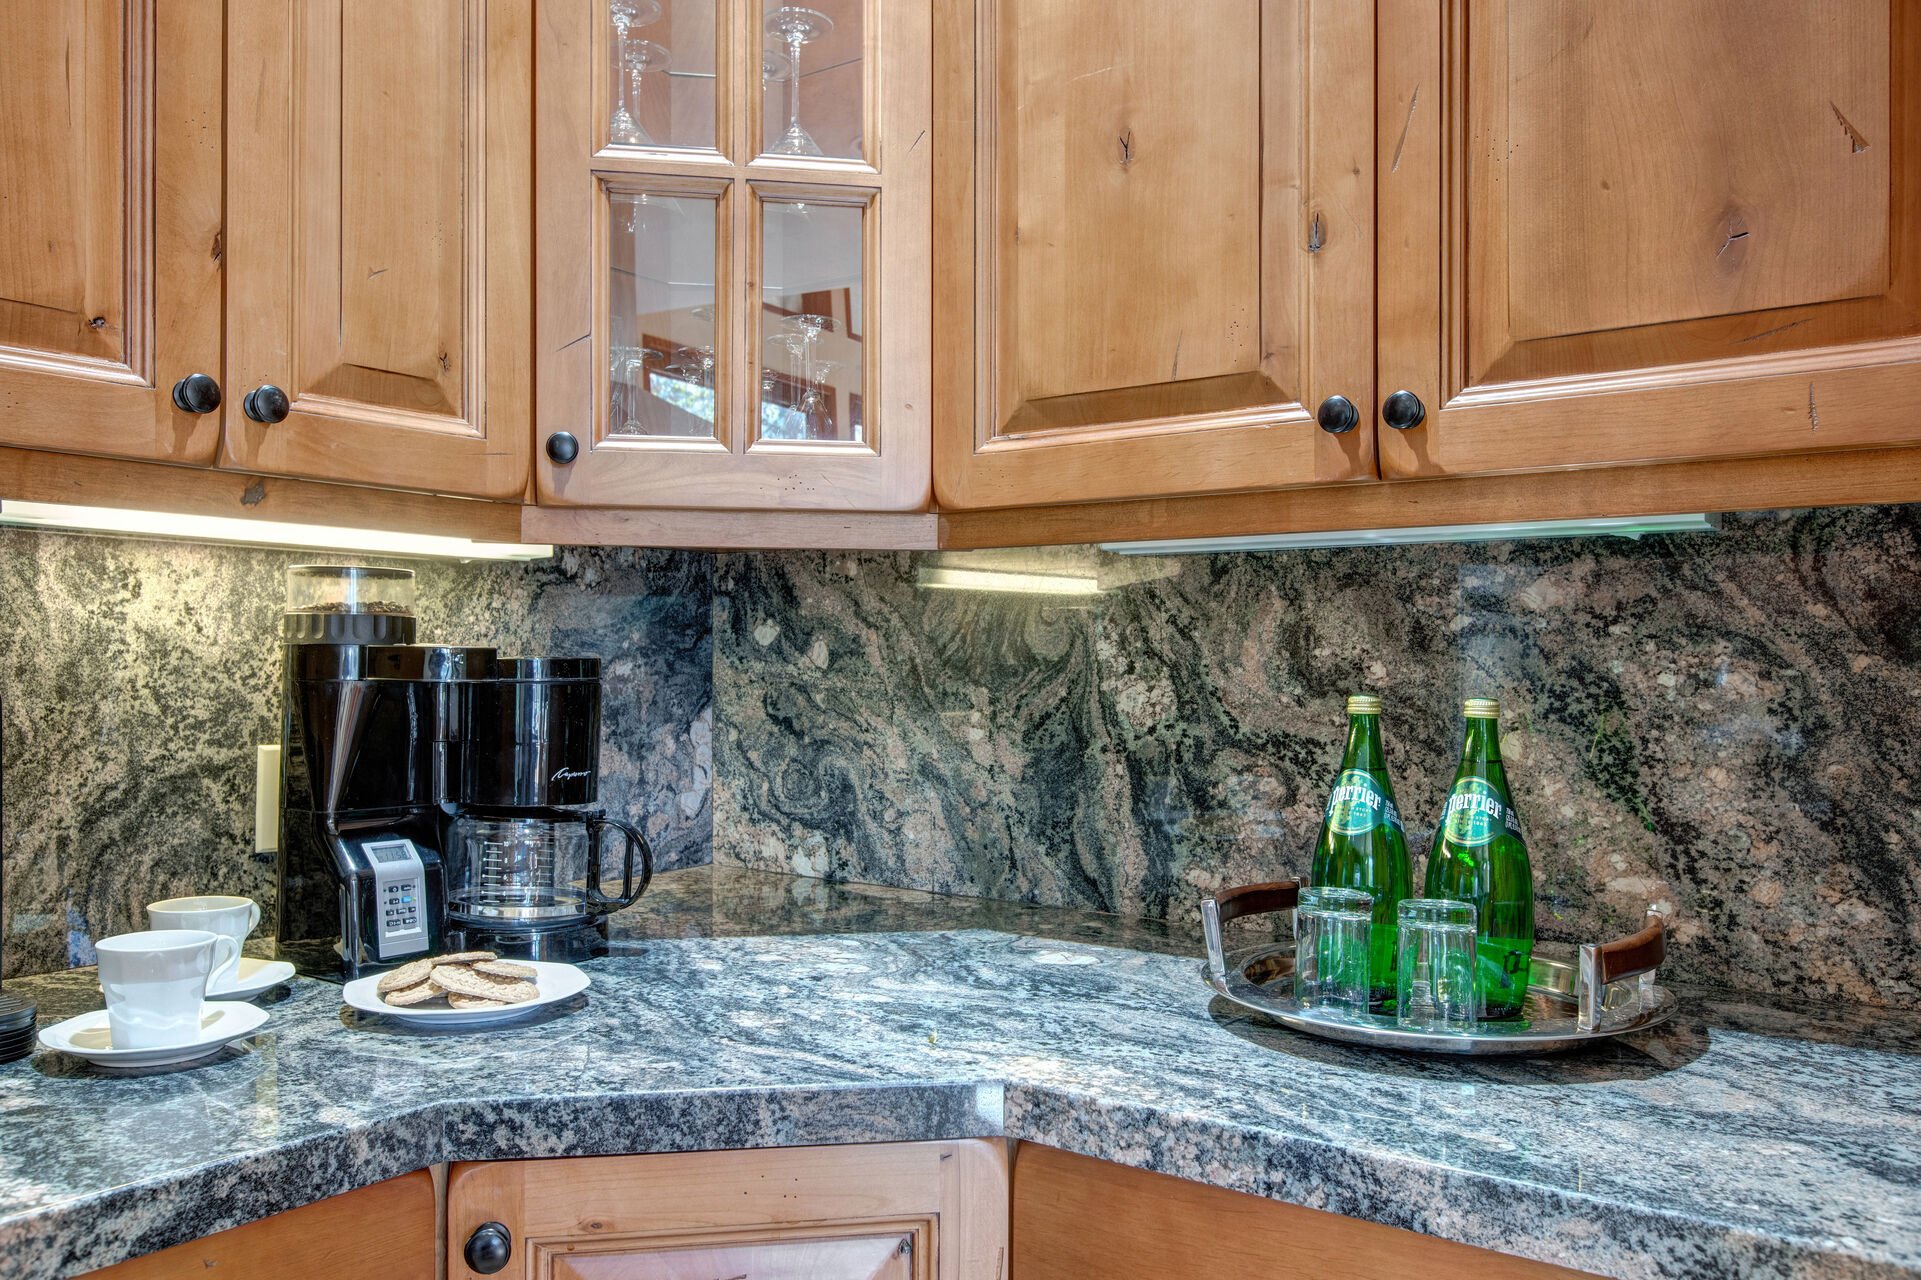 Fully Equipped gourmet kitchen with gorgeous stone countertops and backsplash, stainless steel appliances, wine fridge, double ovens, full sized laundry units, and island bar seating for 3